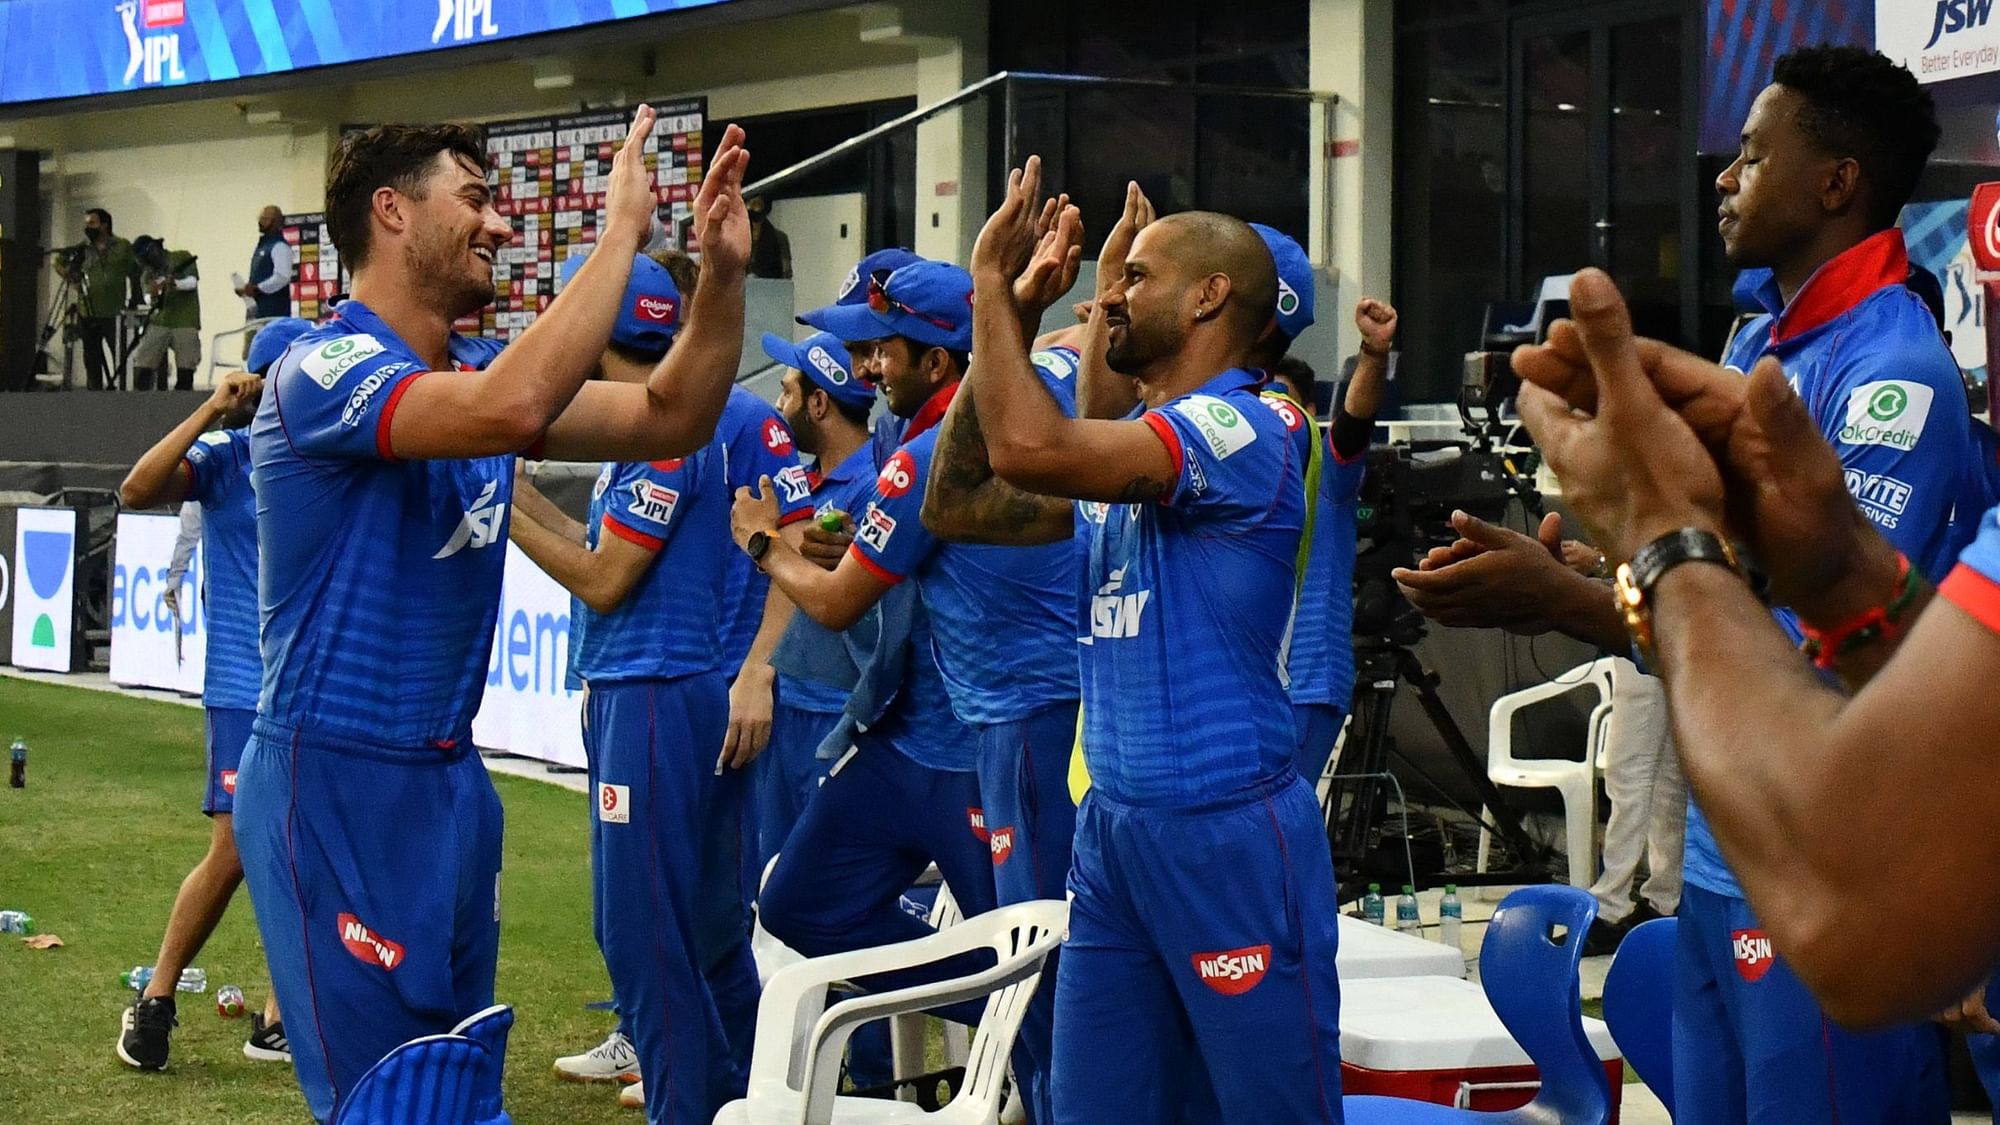 IPL 2020: Delhi Capitals (DC) held their nerve to edge out the Kings XI Punjab (KXIP) in a heart-stopping Super Over.